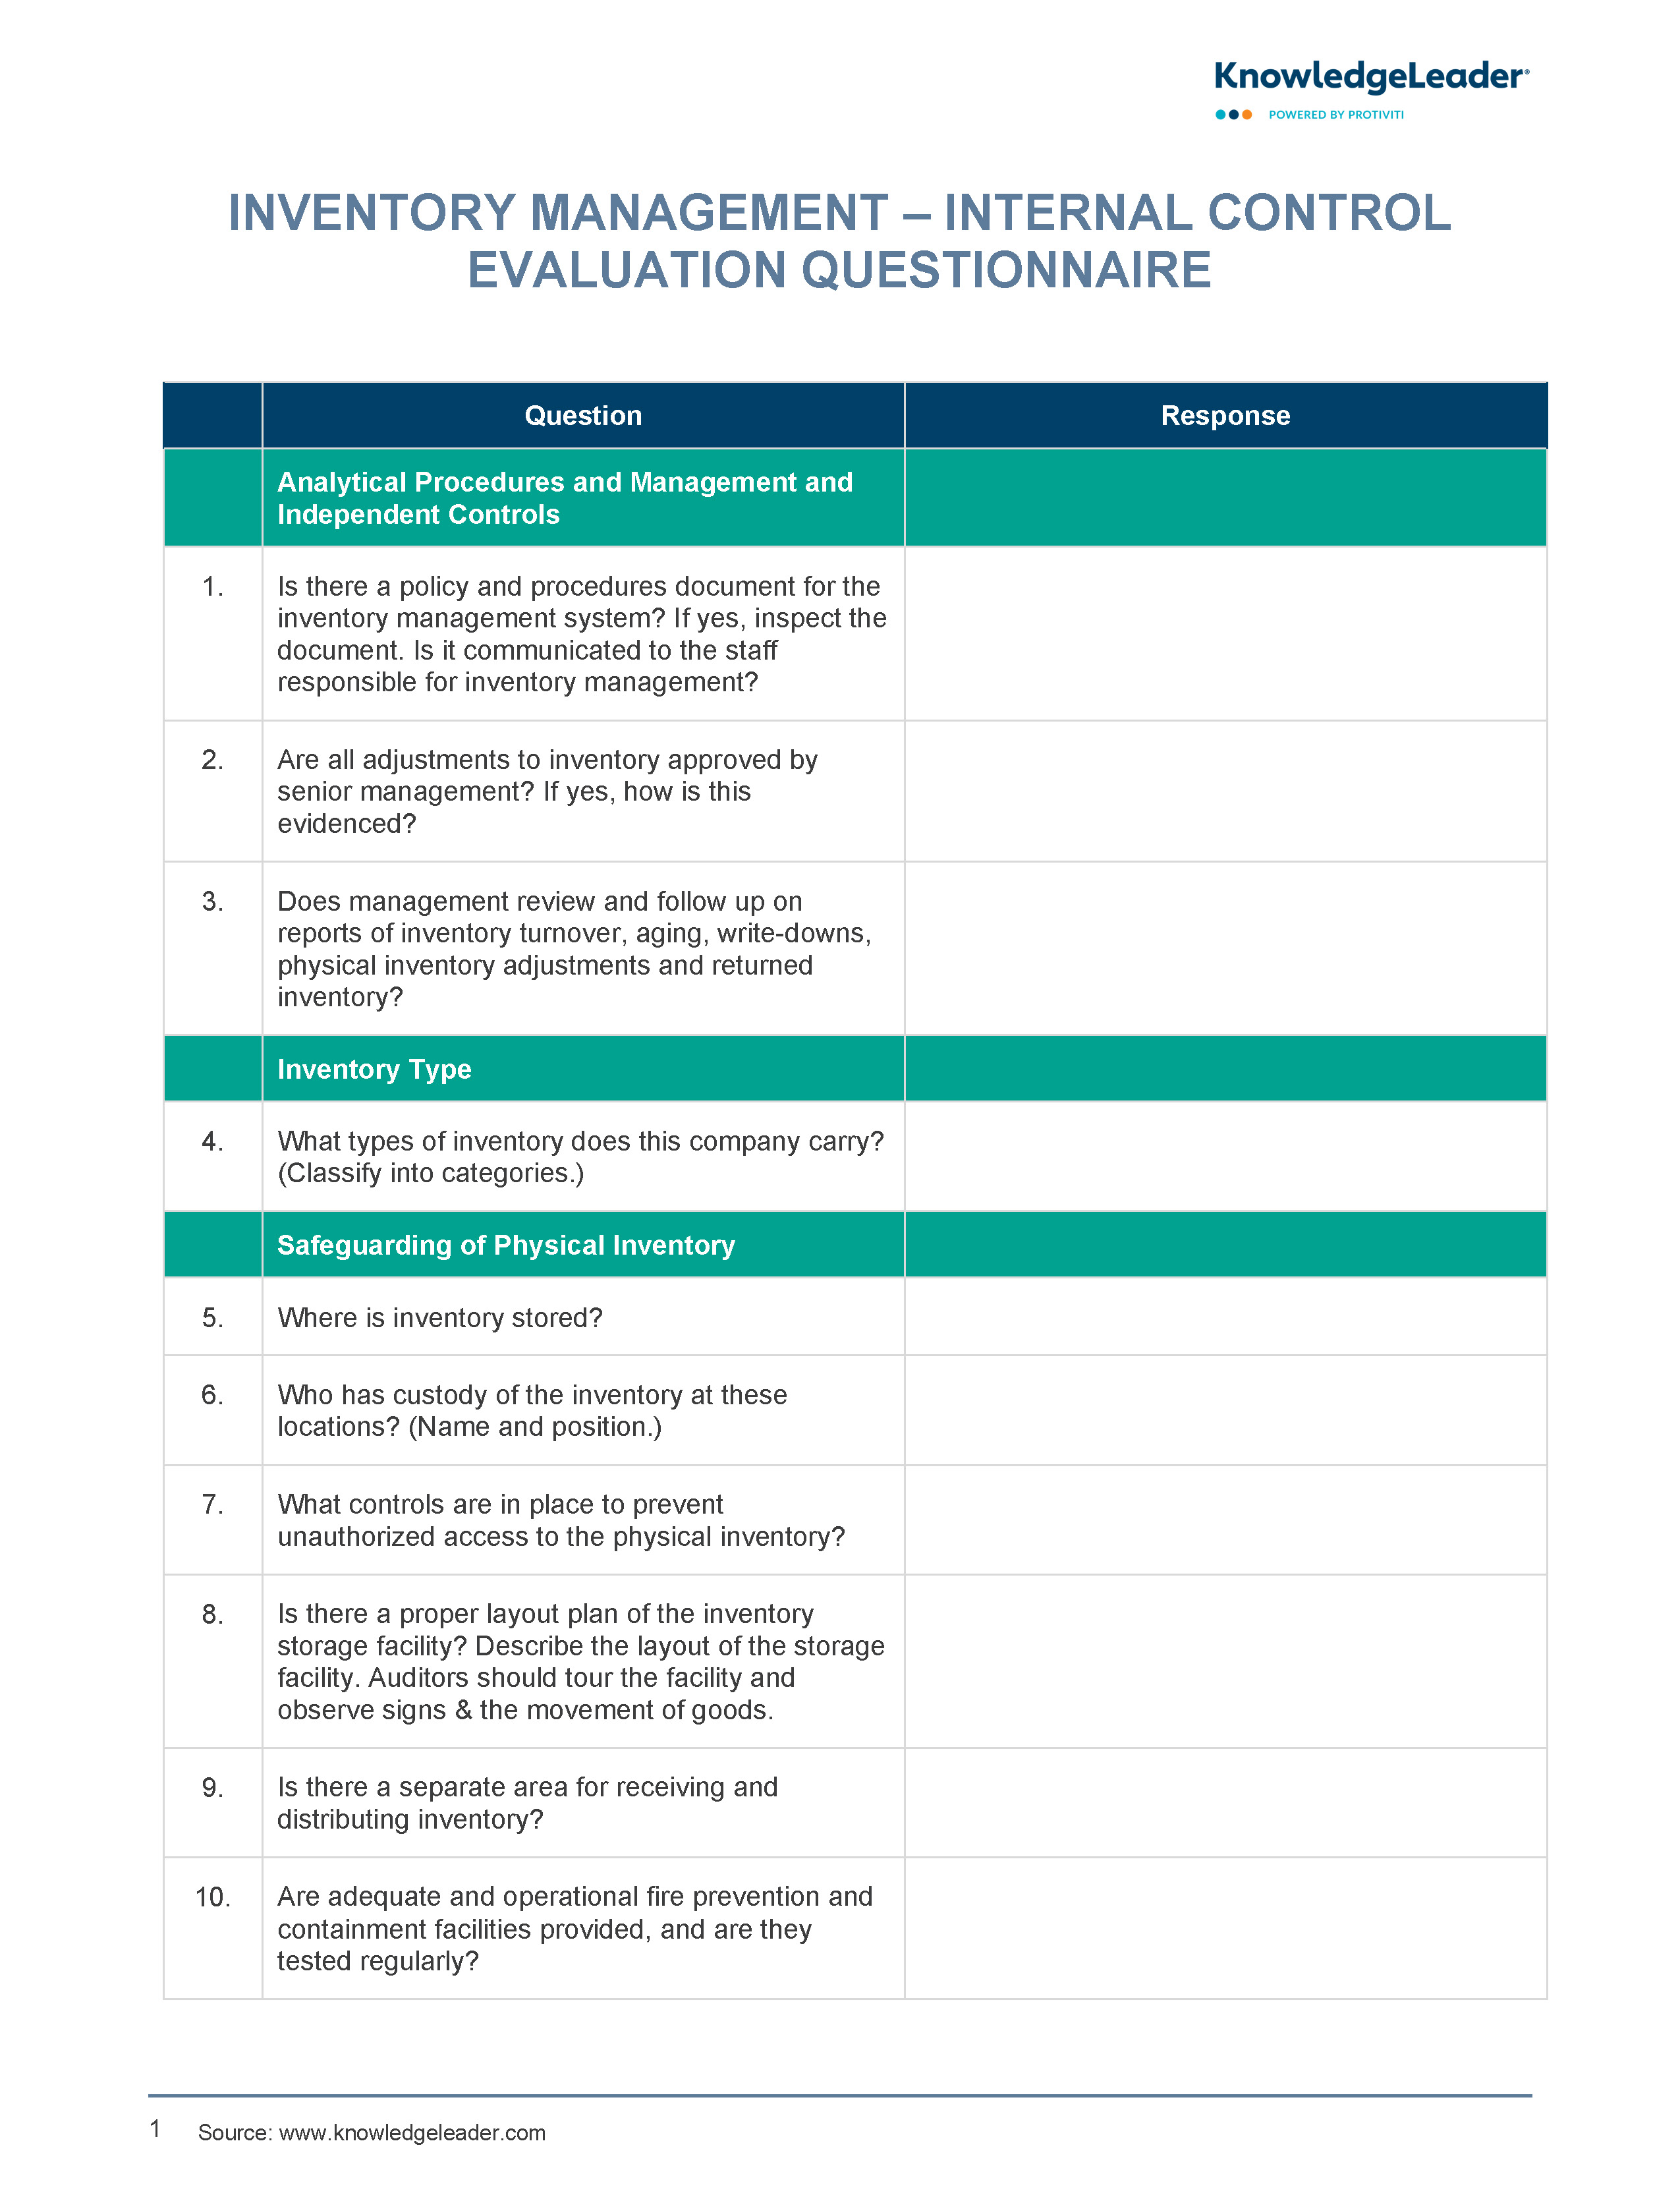 Screenshot of the first page of Inventory Management – Internal Control Questionnaire